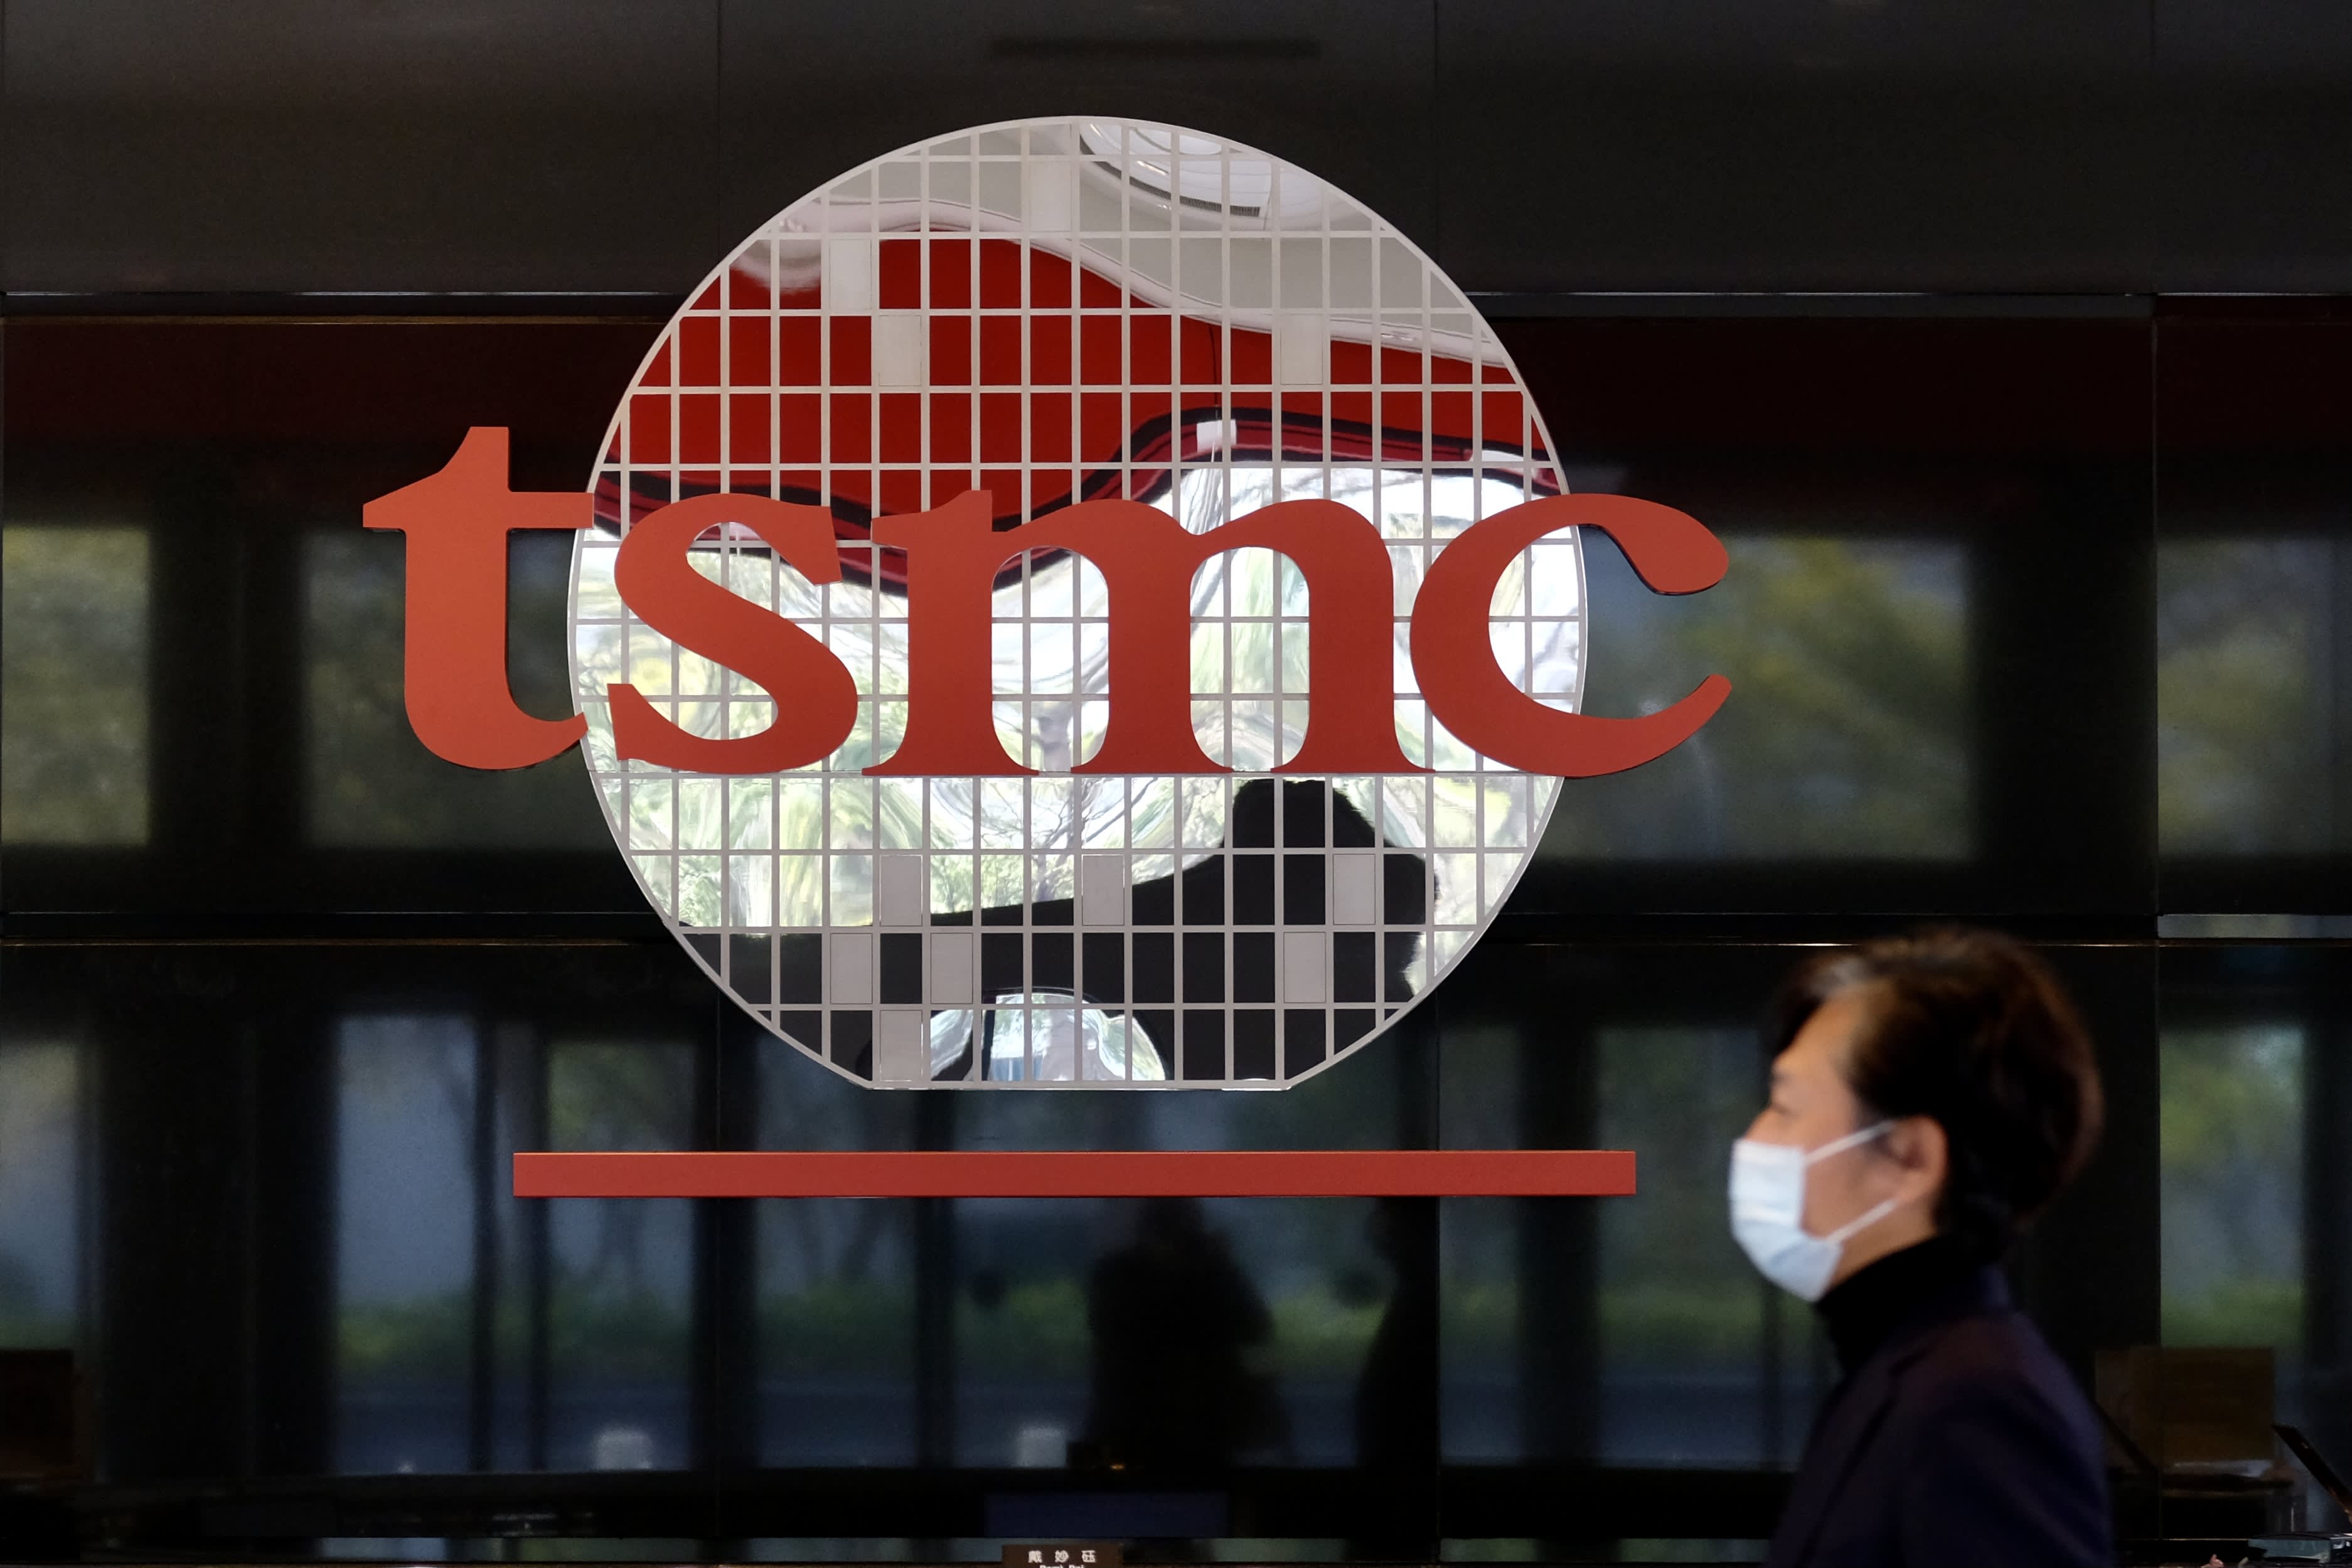 The world's largest chipmaker Taiwan Semiconductor Manufacturing Company (TSMC) has overtaken Chinese tech behemoth Tencent to become Asia's